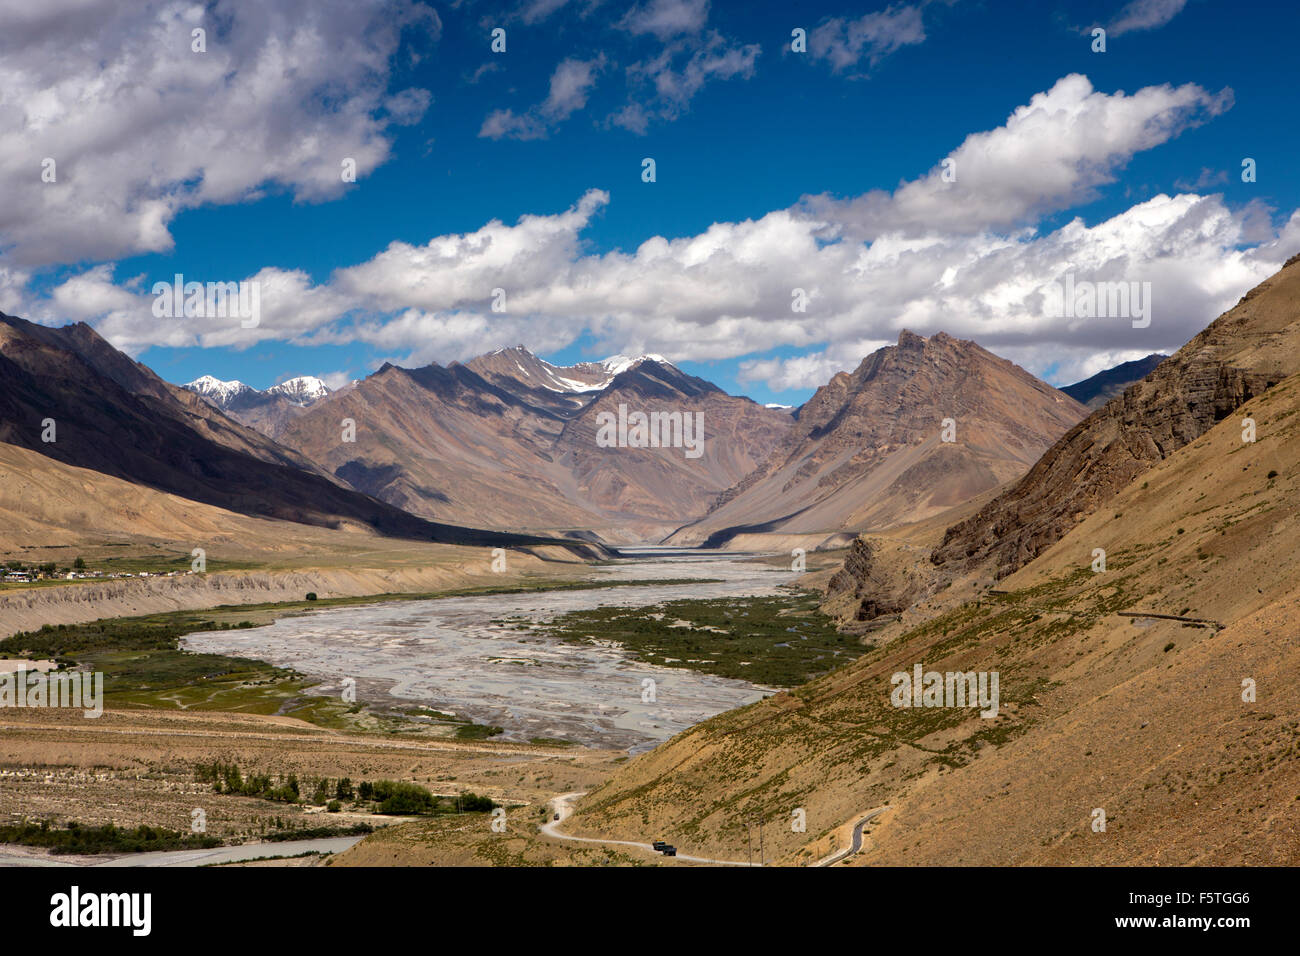 India, Himachal Pradesh, Spiti Valley, elevated view of river and surrounding mountains Stock Photo